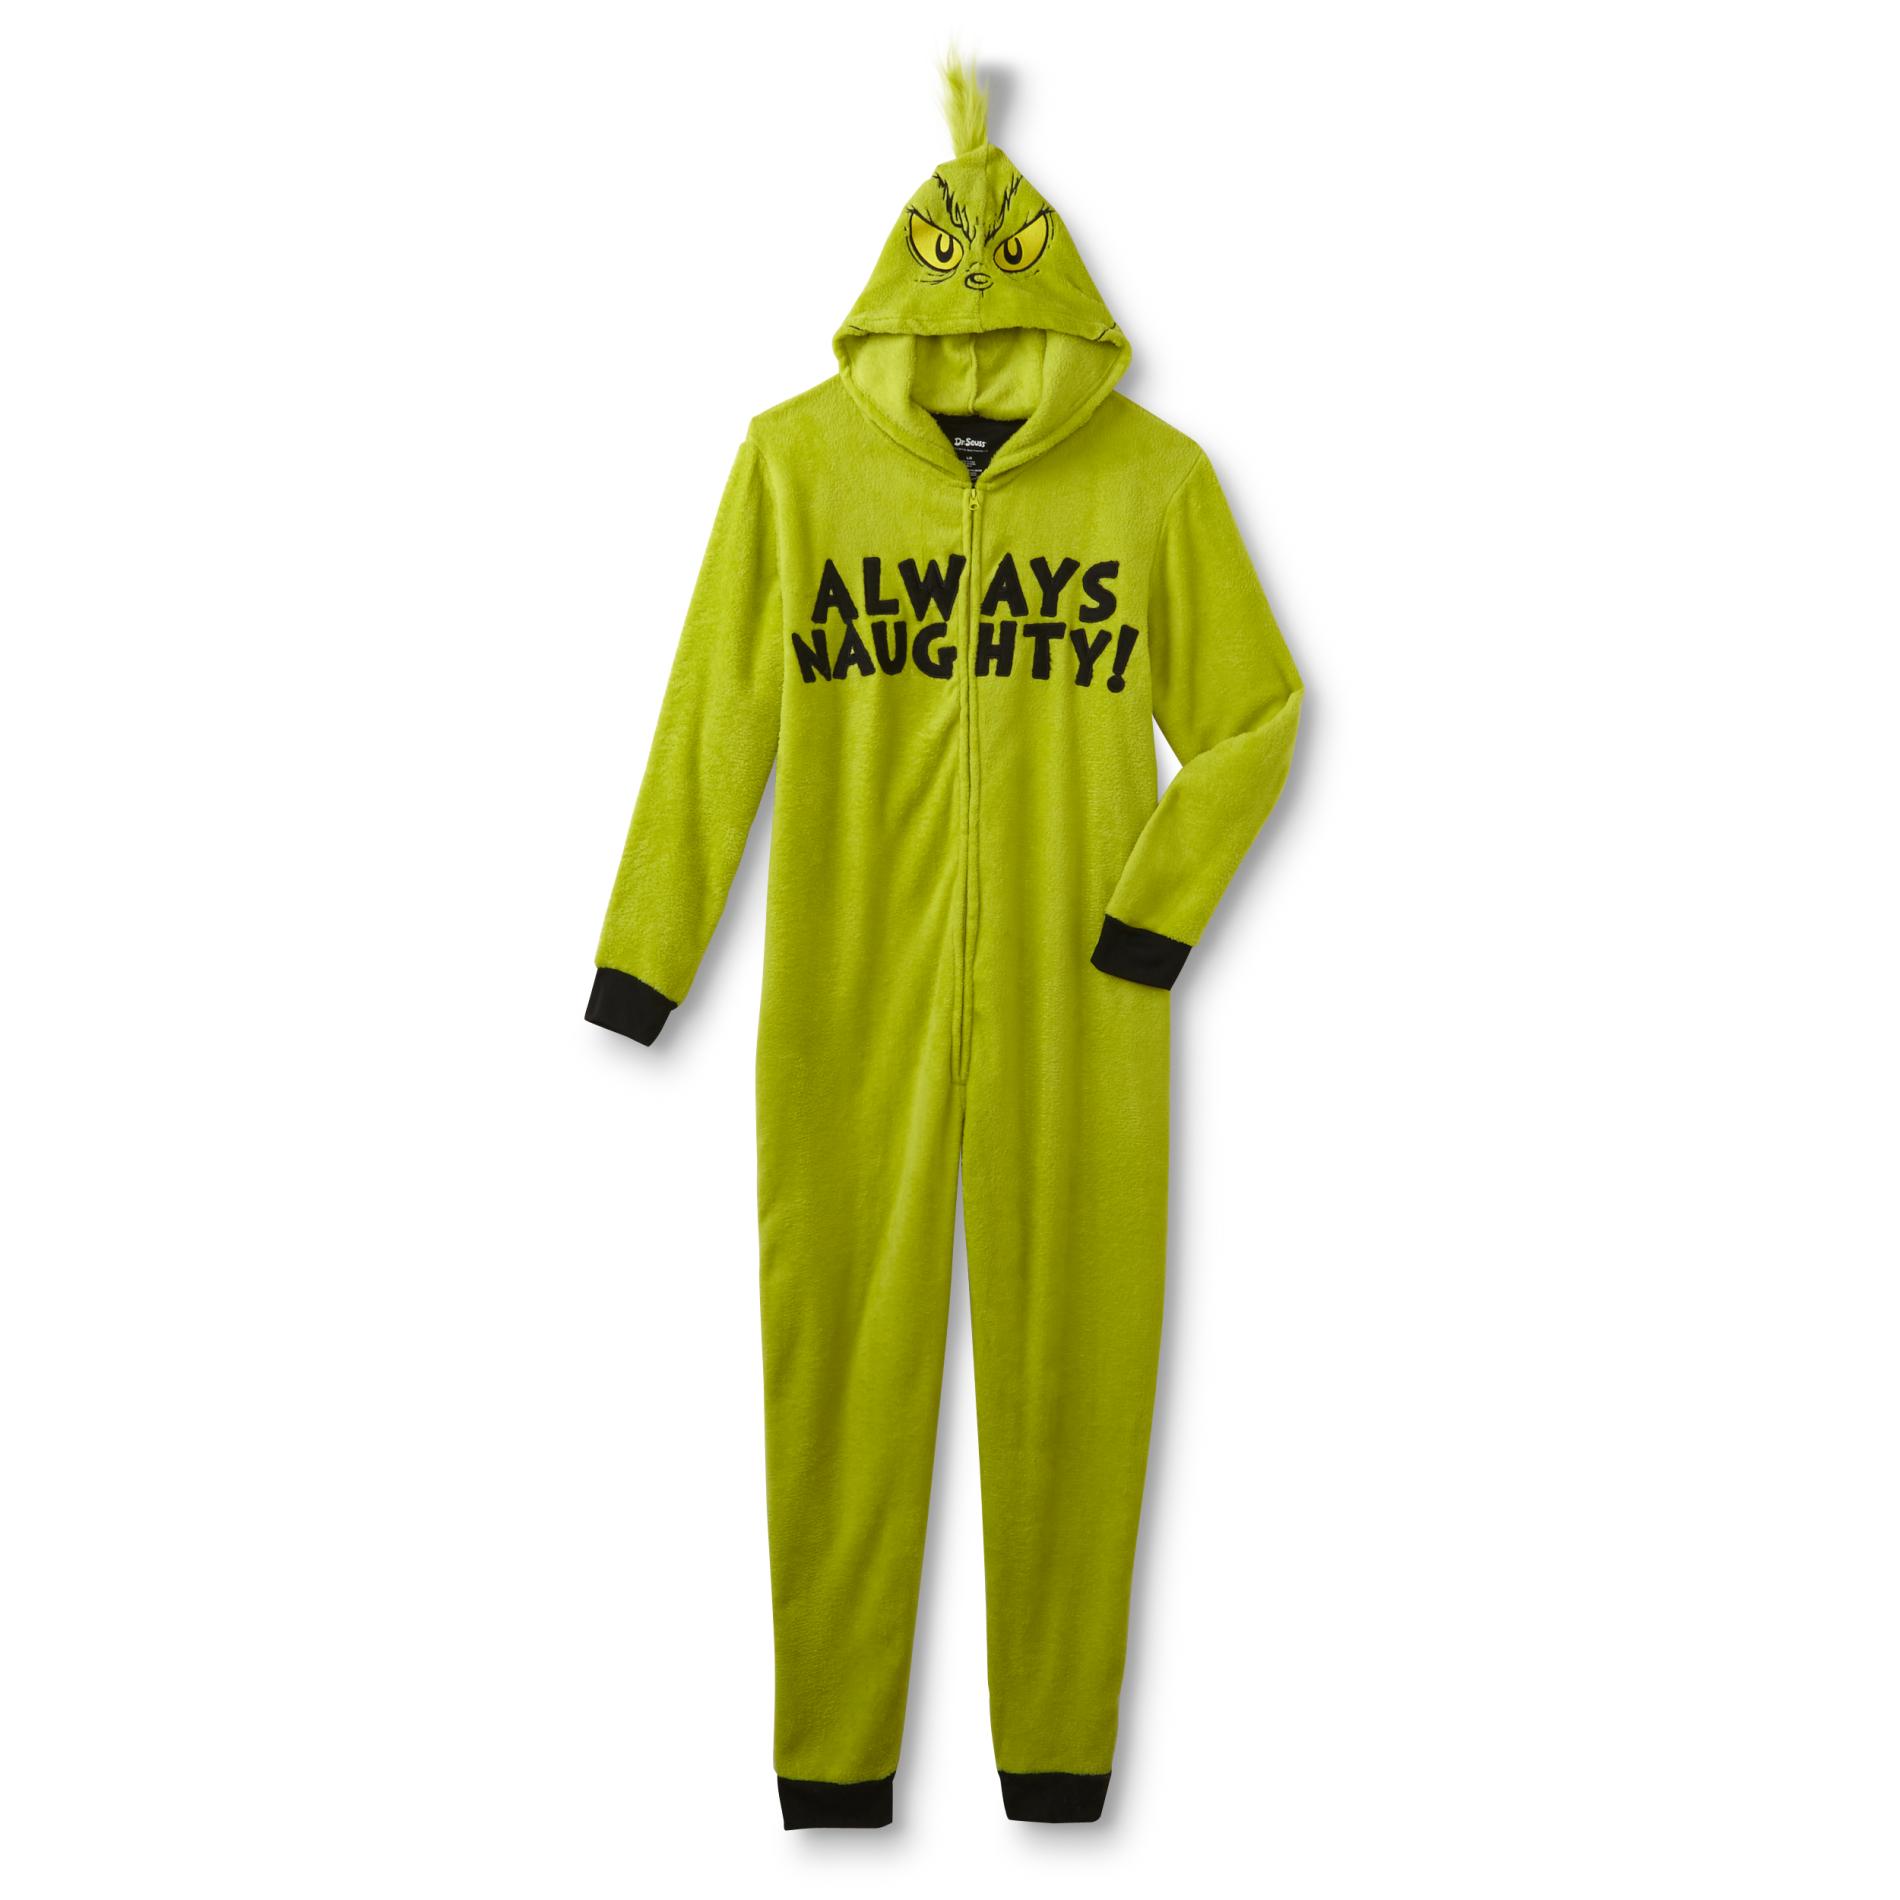 License Character The Grinch Men's Hooded One-Piece Pajamas-Always Naughty